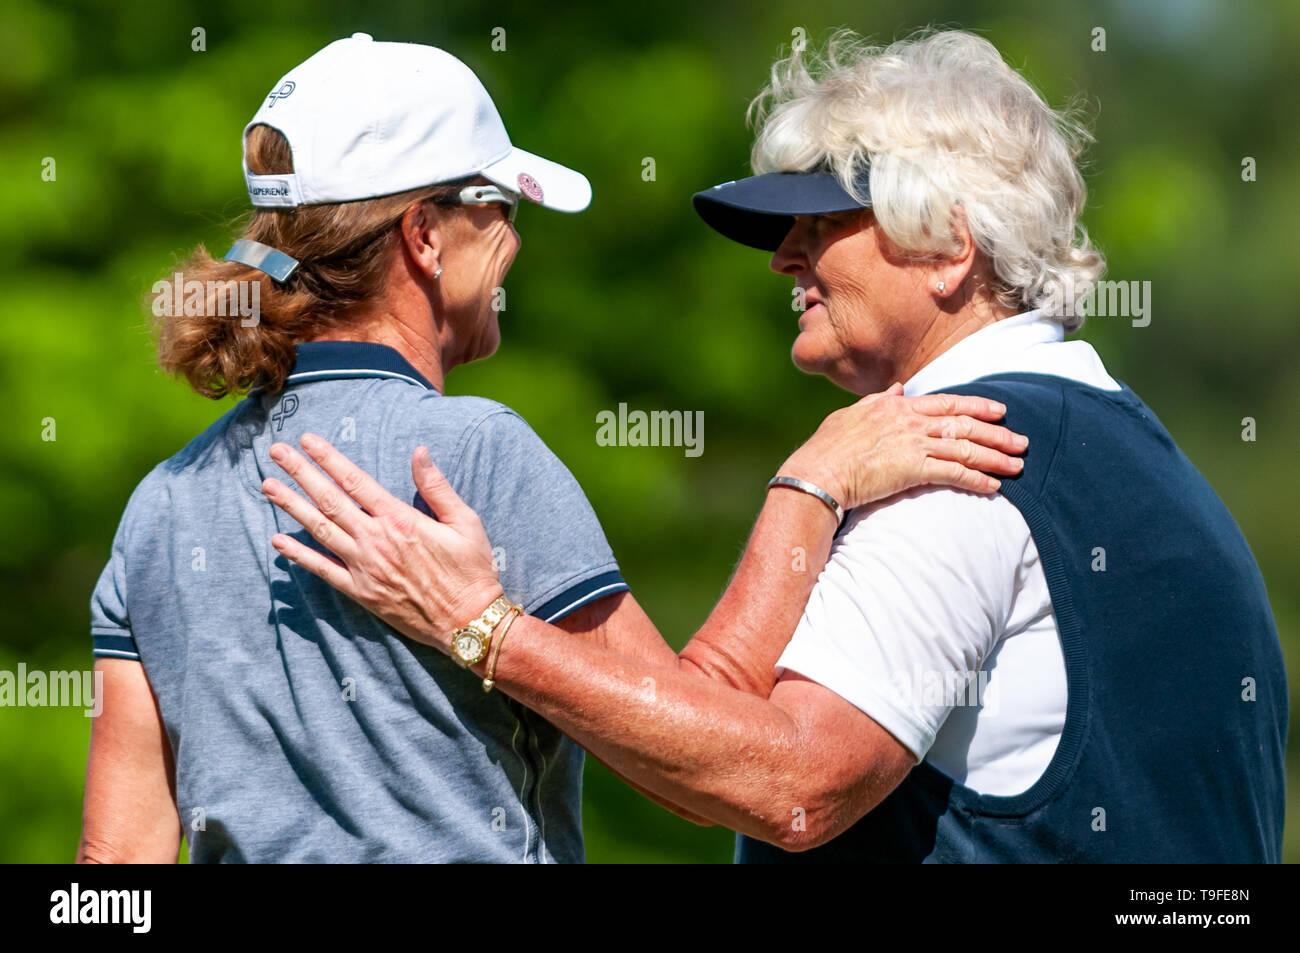 Southern Pines, North Carolina, USA. 18th May, 2019. May 18, 2019 - Southern Pines, North Carolina, US - HELEN ALFREDSSON of Sweden and LAURA DAVIES of England congratulate each other on their round during the third round of the USGA's 2nd U.S. Senior Women's Open Championship at Pine Needles Lodge & Golf Club, May 18, 2019 in Southern Pines, North Carolina. The original field of 120 golfers was narrowed down to 51 for today's third round. Credit: Timothy L. Hale/ZUMA Wire/Alamy Live News Stock Photo